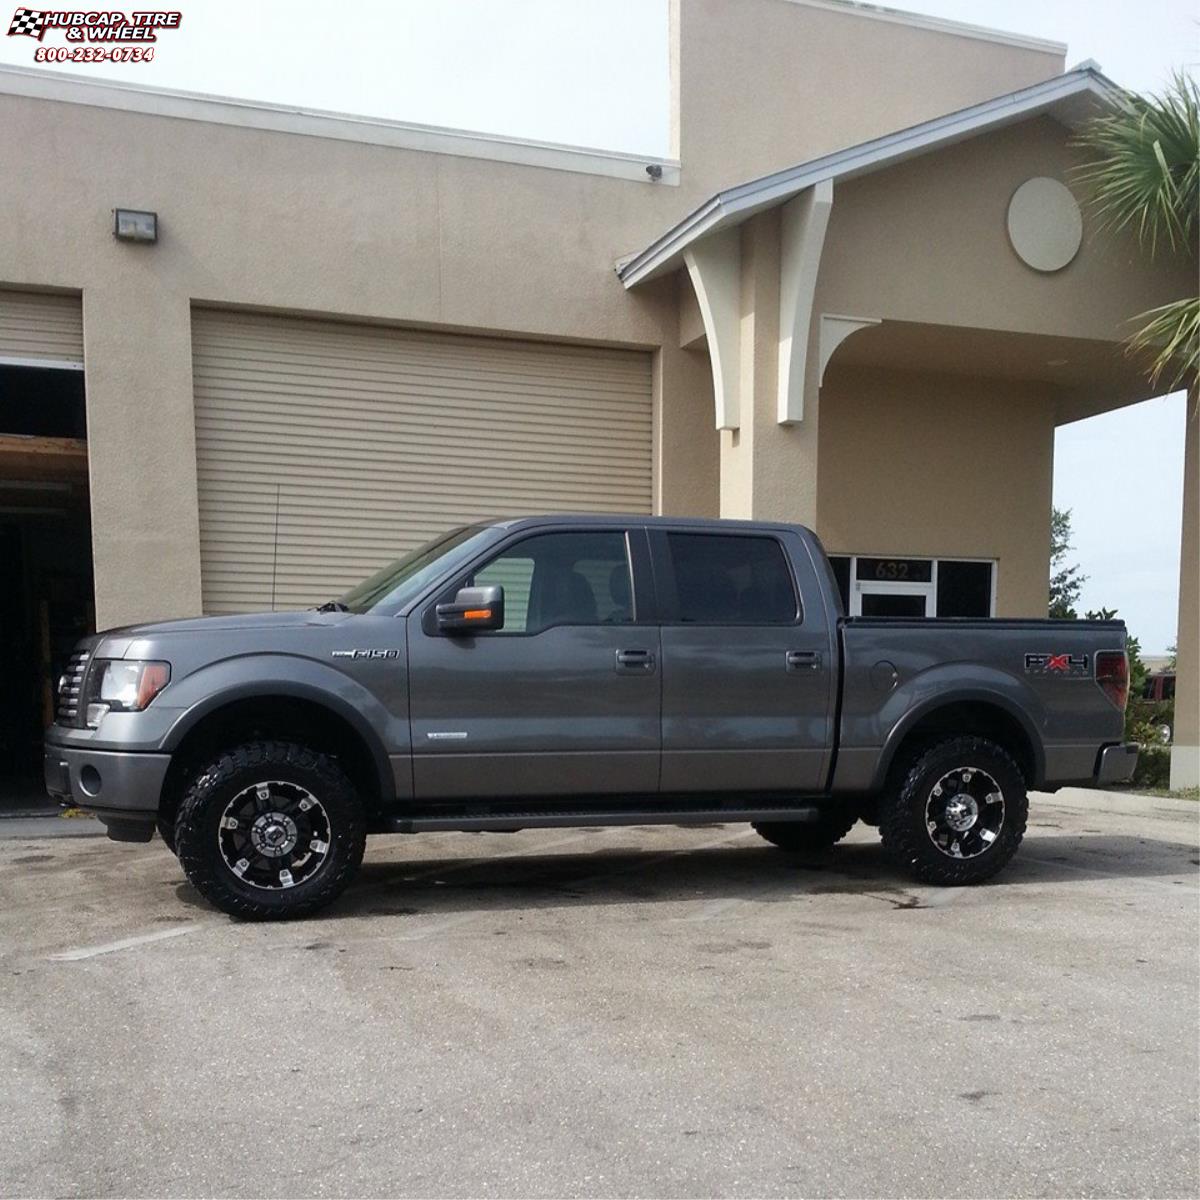 vehicle gallery/ford f 150 xd series xd797 spy x  Gloss Black Machined wheels and rims